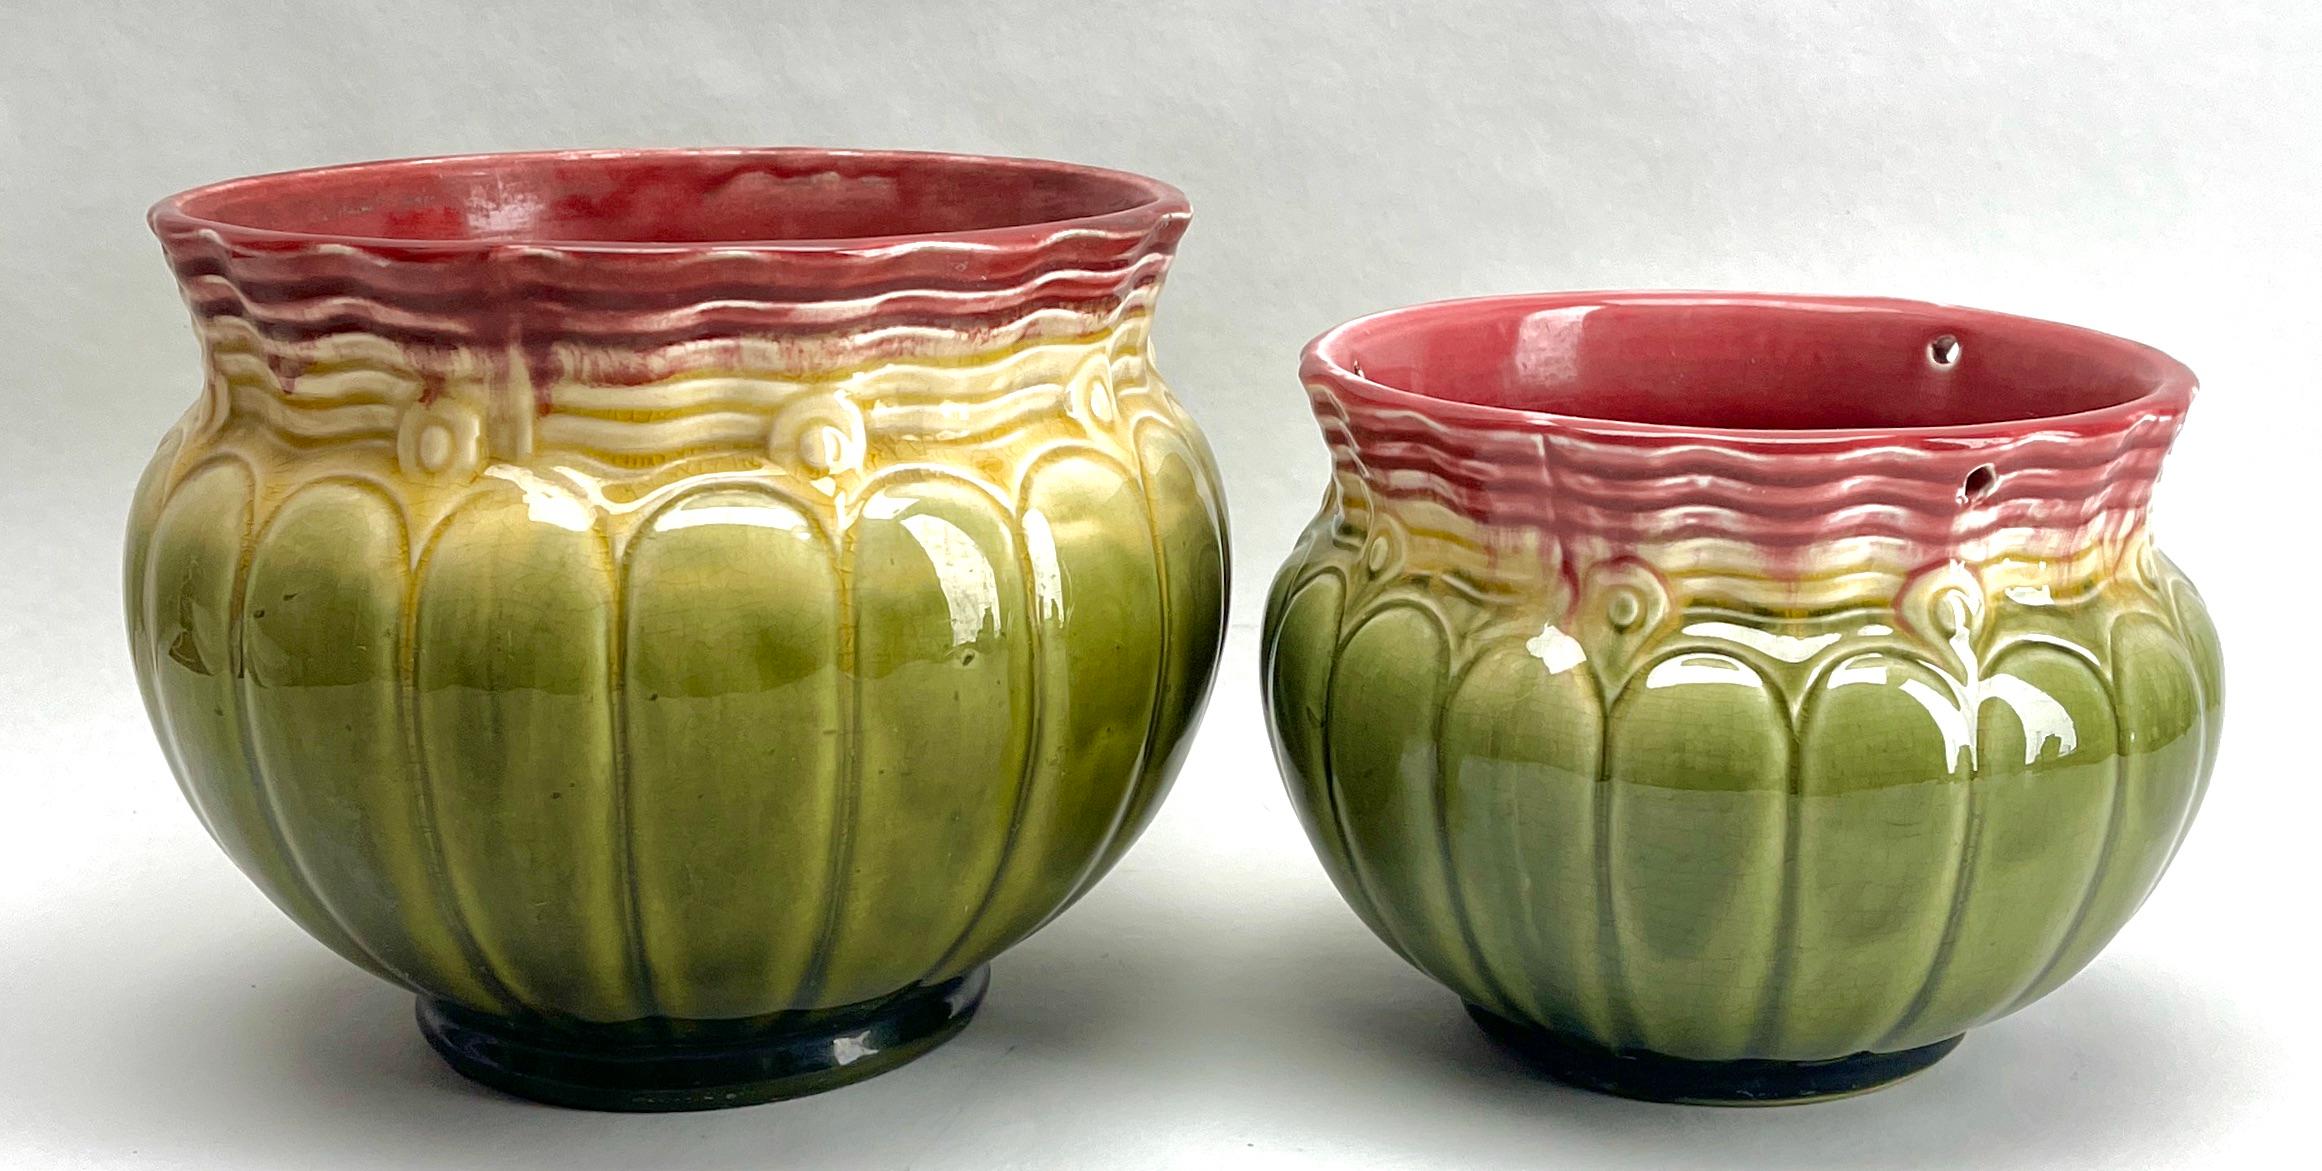 Brilliant handmade Pair hand-glazed Art Nouveau planter jardinière, 1930.

Handmade and hand-glazed in brilliant colored details.
Made in Belgium
Art Nouveau period 1930 fine quality.
The pieces are in Good condition and a real beauty.
Size